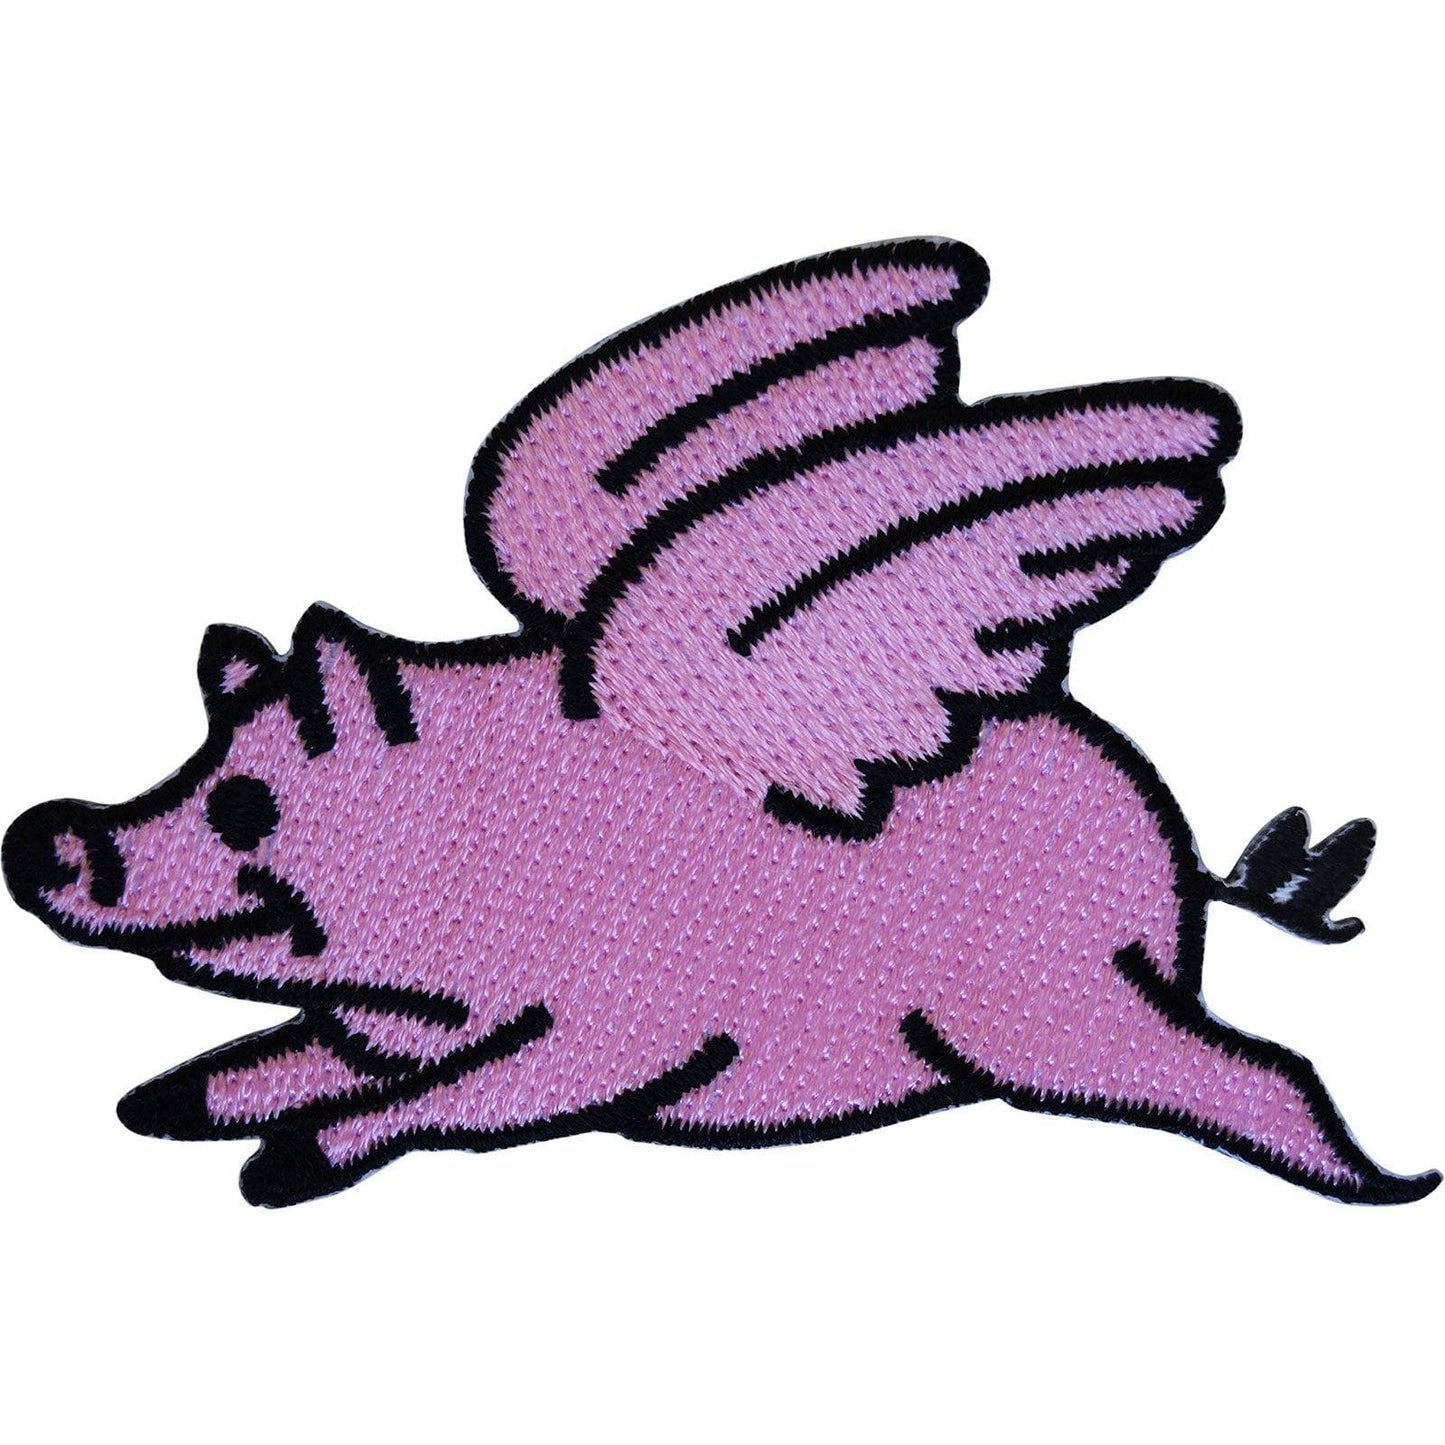 Flying Pig Patch Iron Sew On Clothes Farm Yard Animal Embroidered Badge Applique